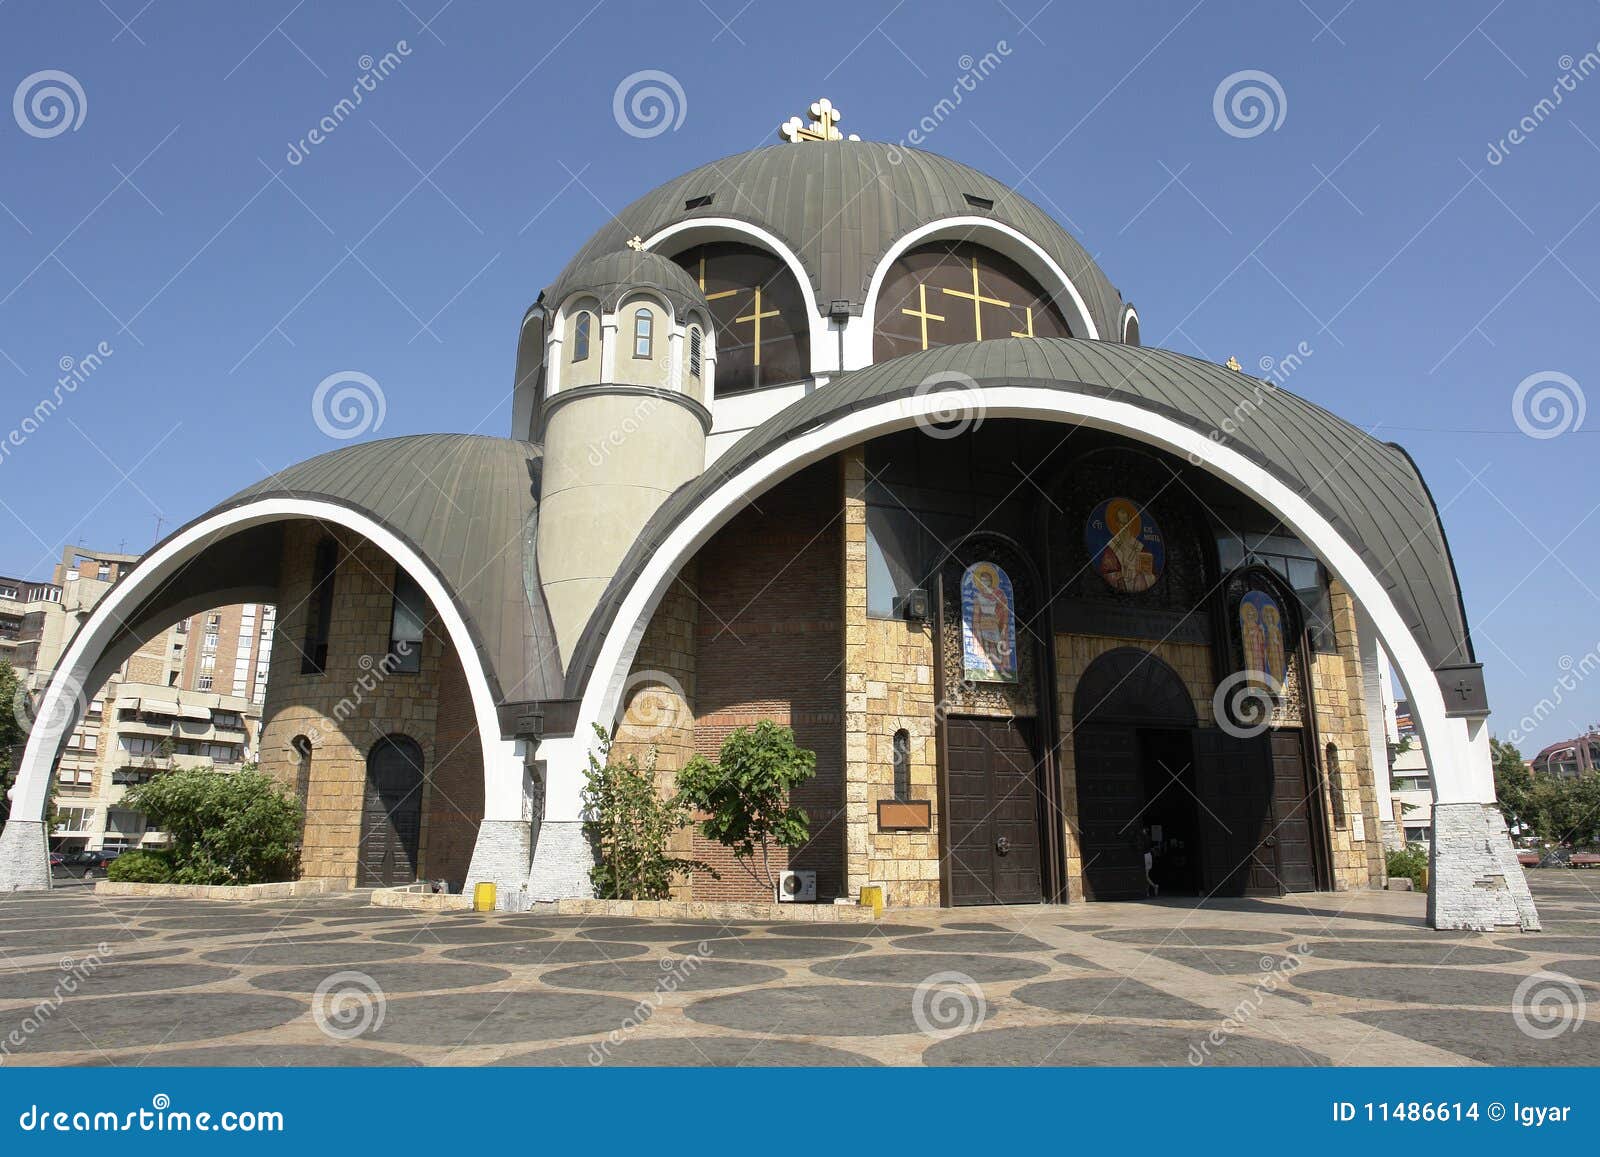 orthodox temple in a modernist style